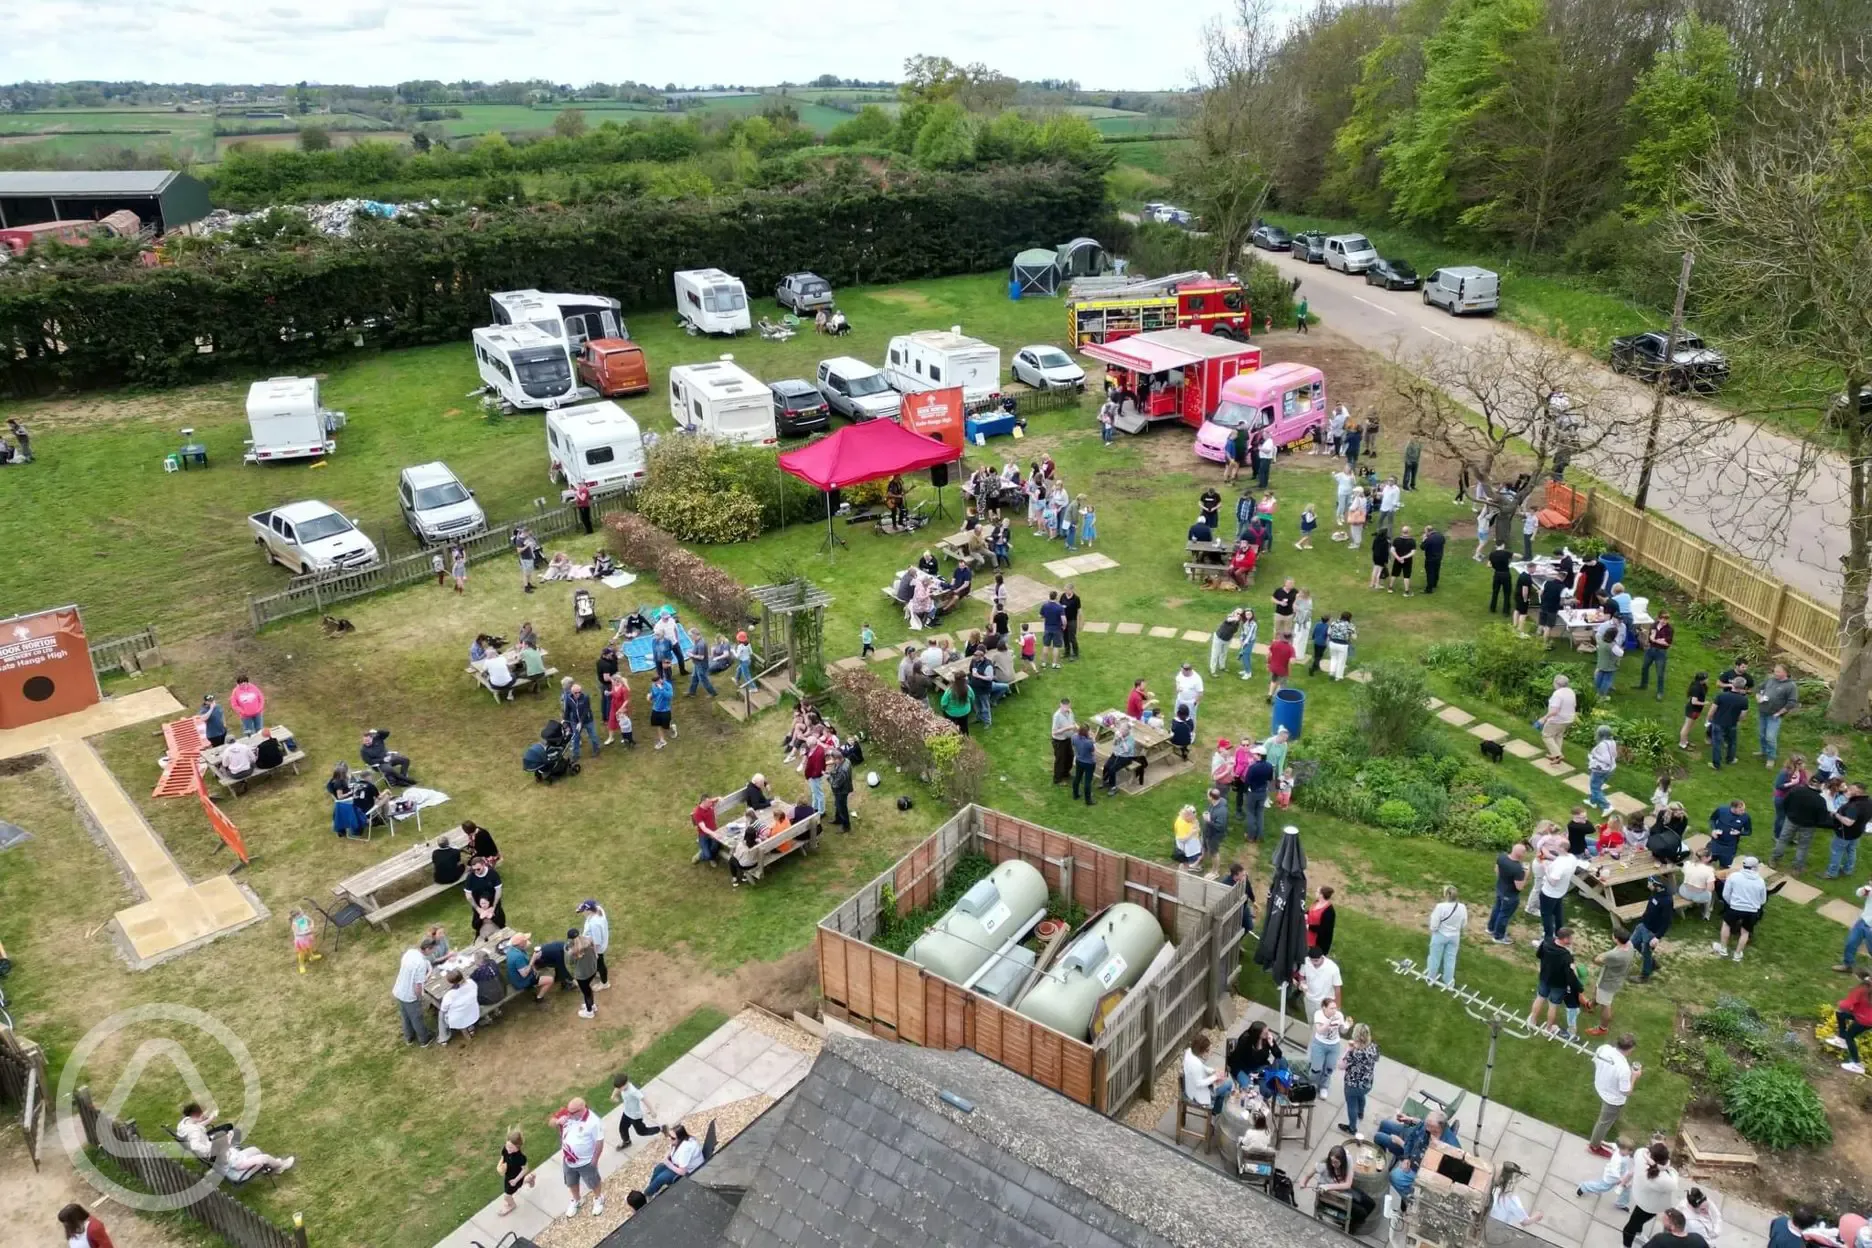 Camping pitches and pub garden